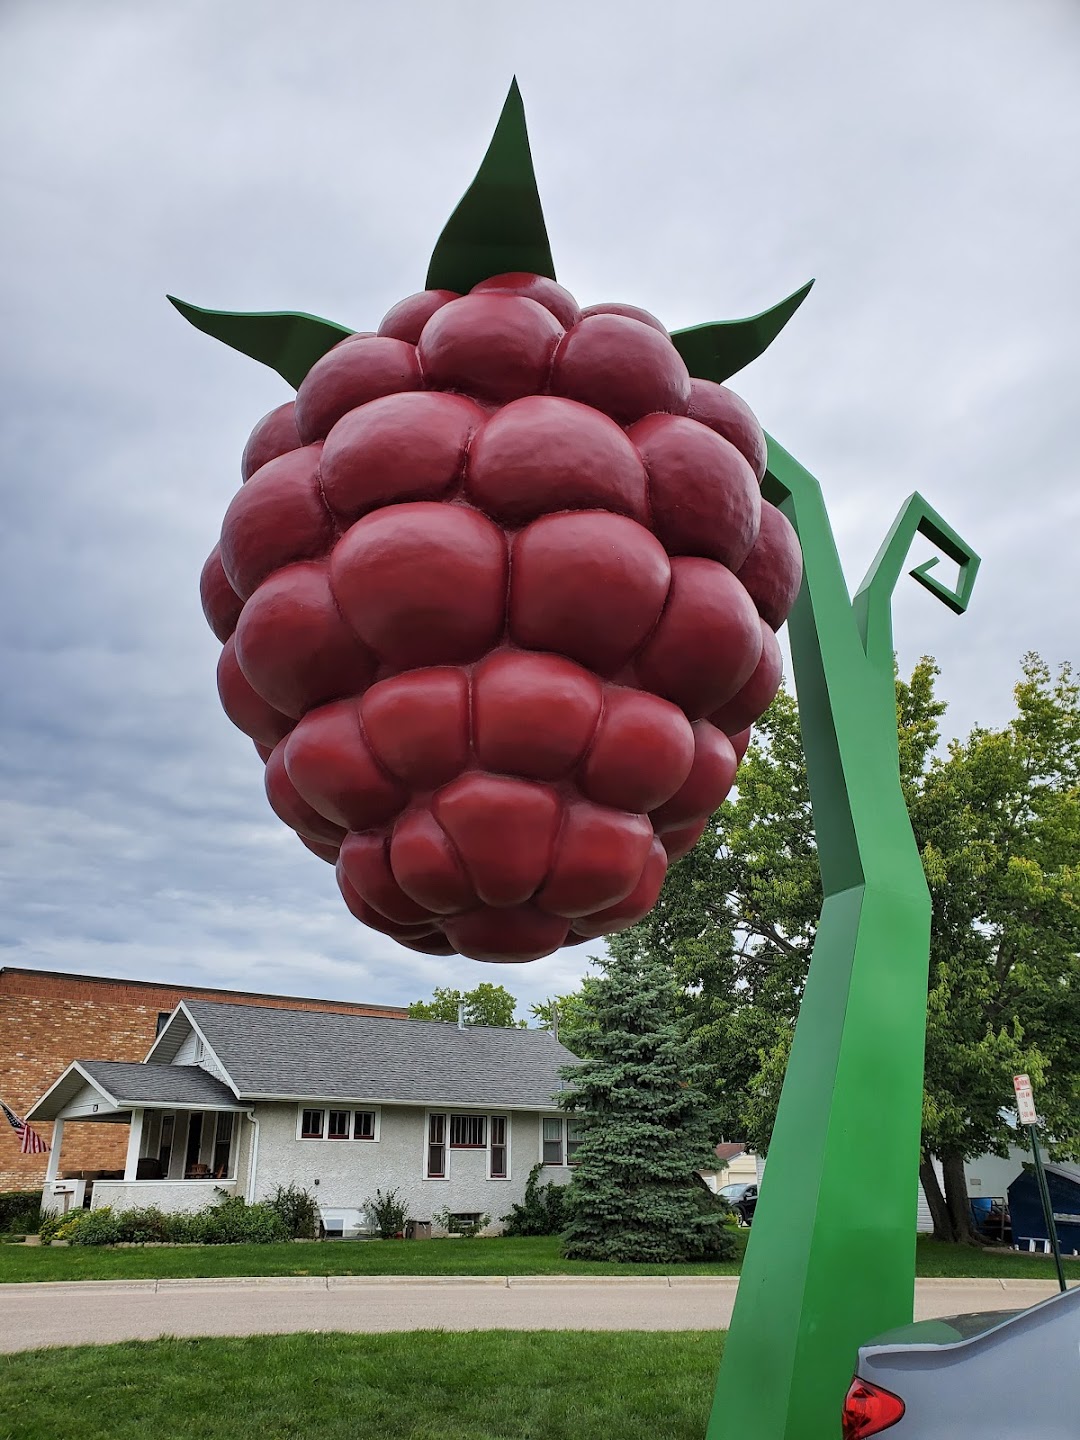 The Worlds largest Raspberry